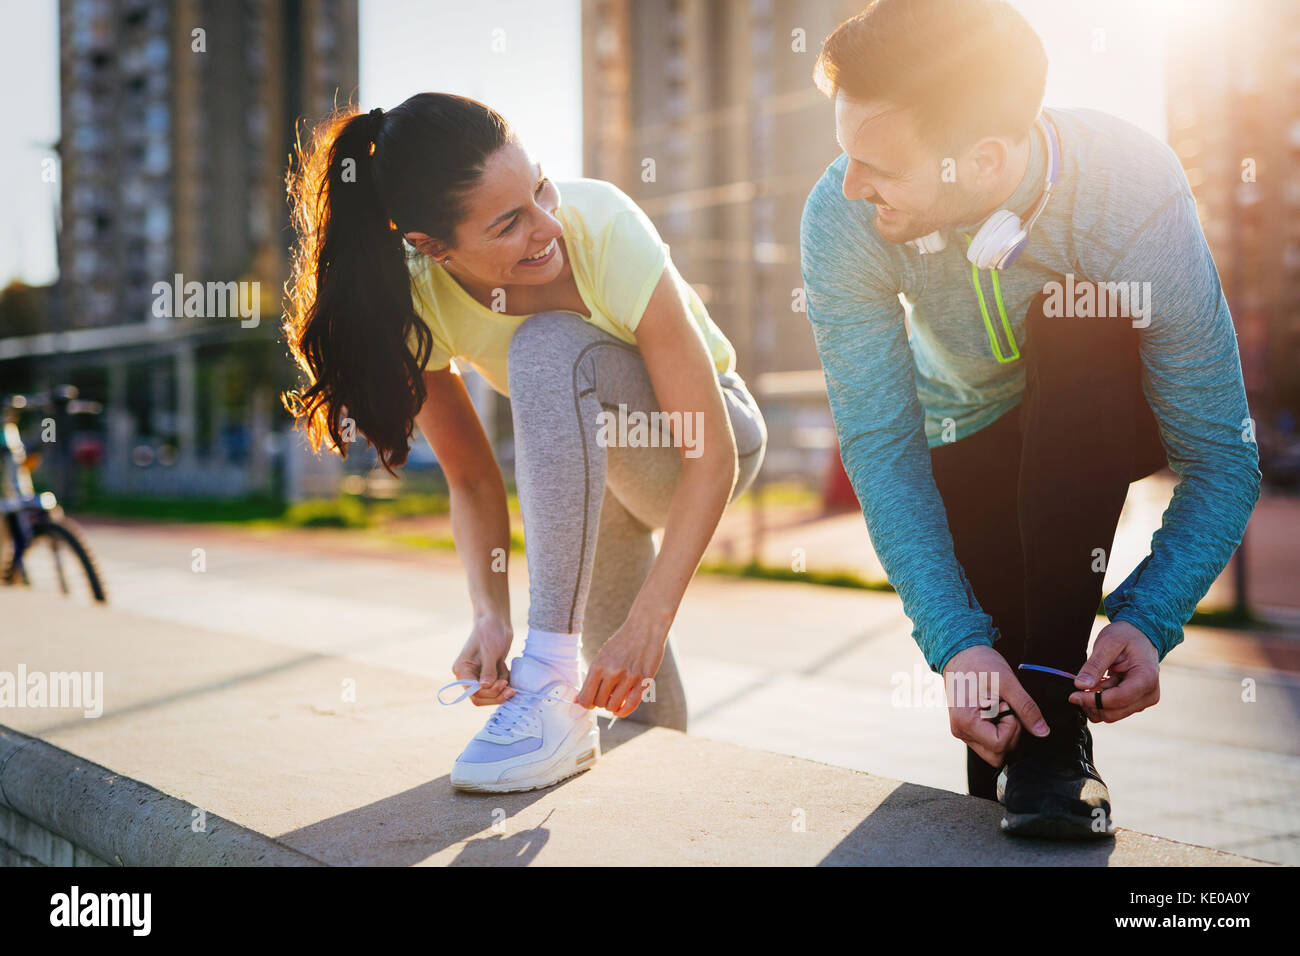 Runners tying running shoes and getting ready to run Stock Photo